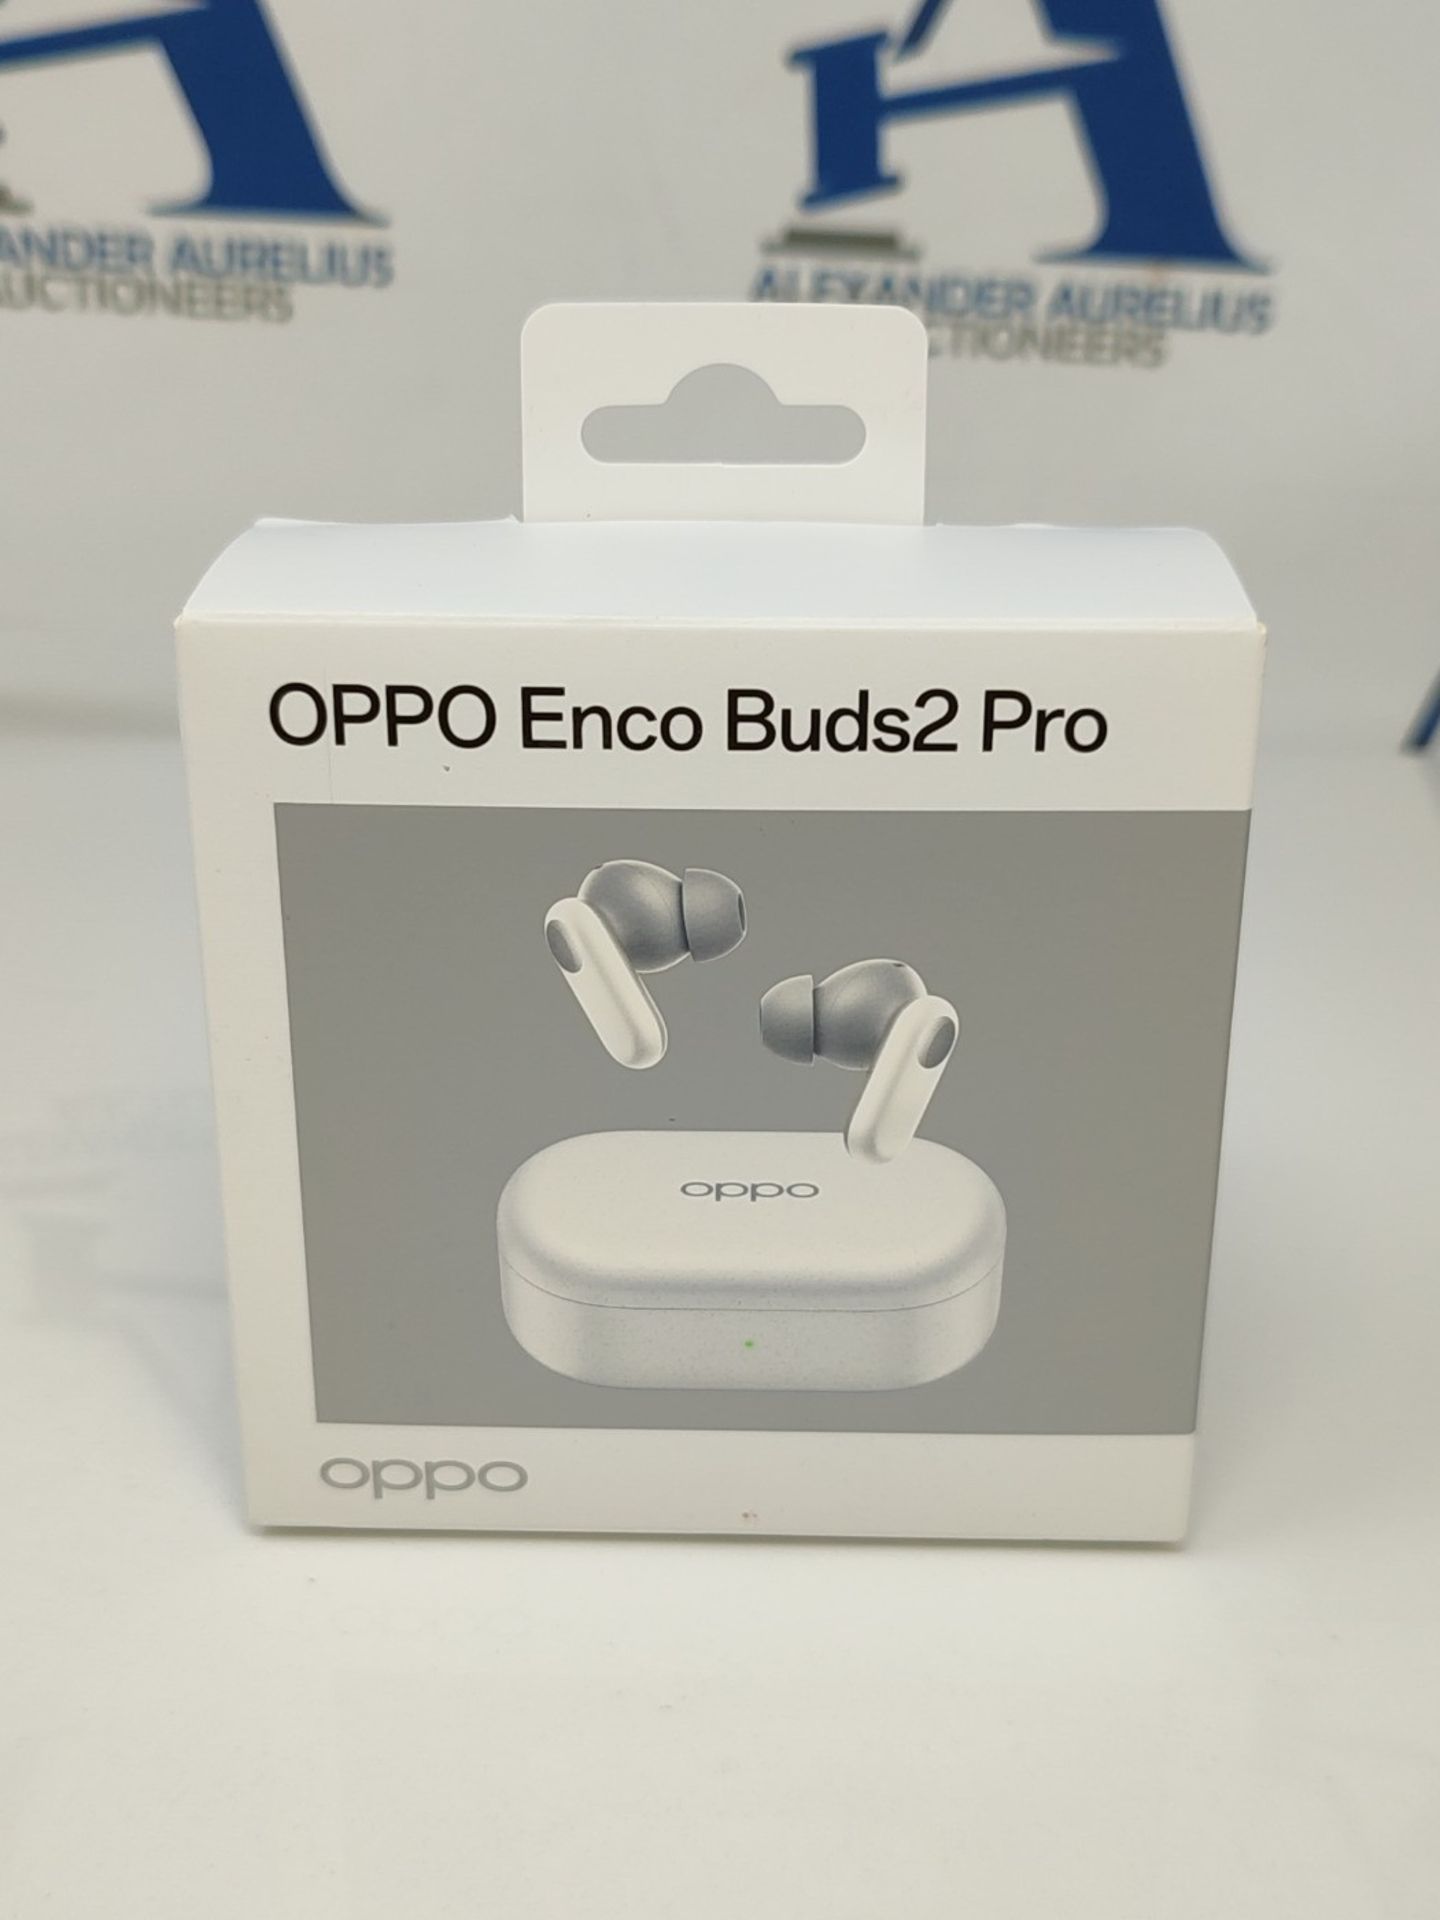 OPPO Enco Buds2 Pro True Wireless Earbuds, 38h Battery Life, 12.4mm Drivers, Bluetooth - Image 5 of 6